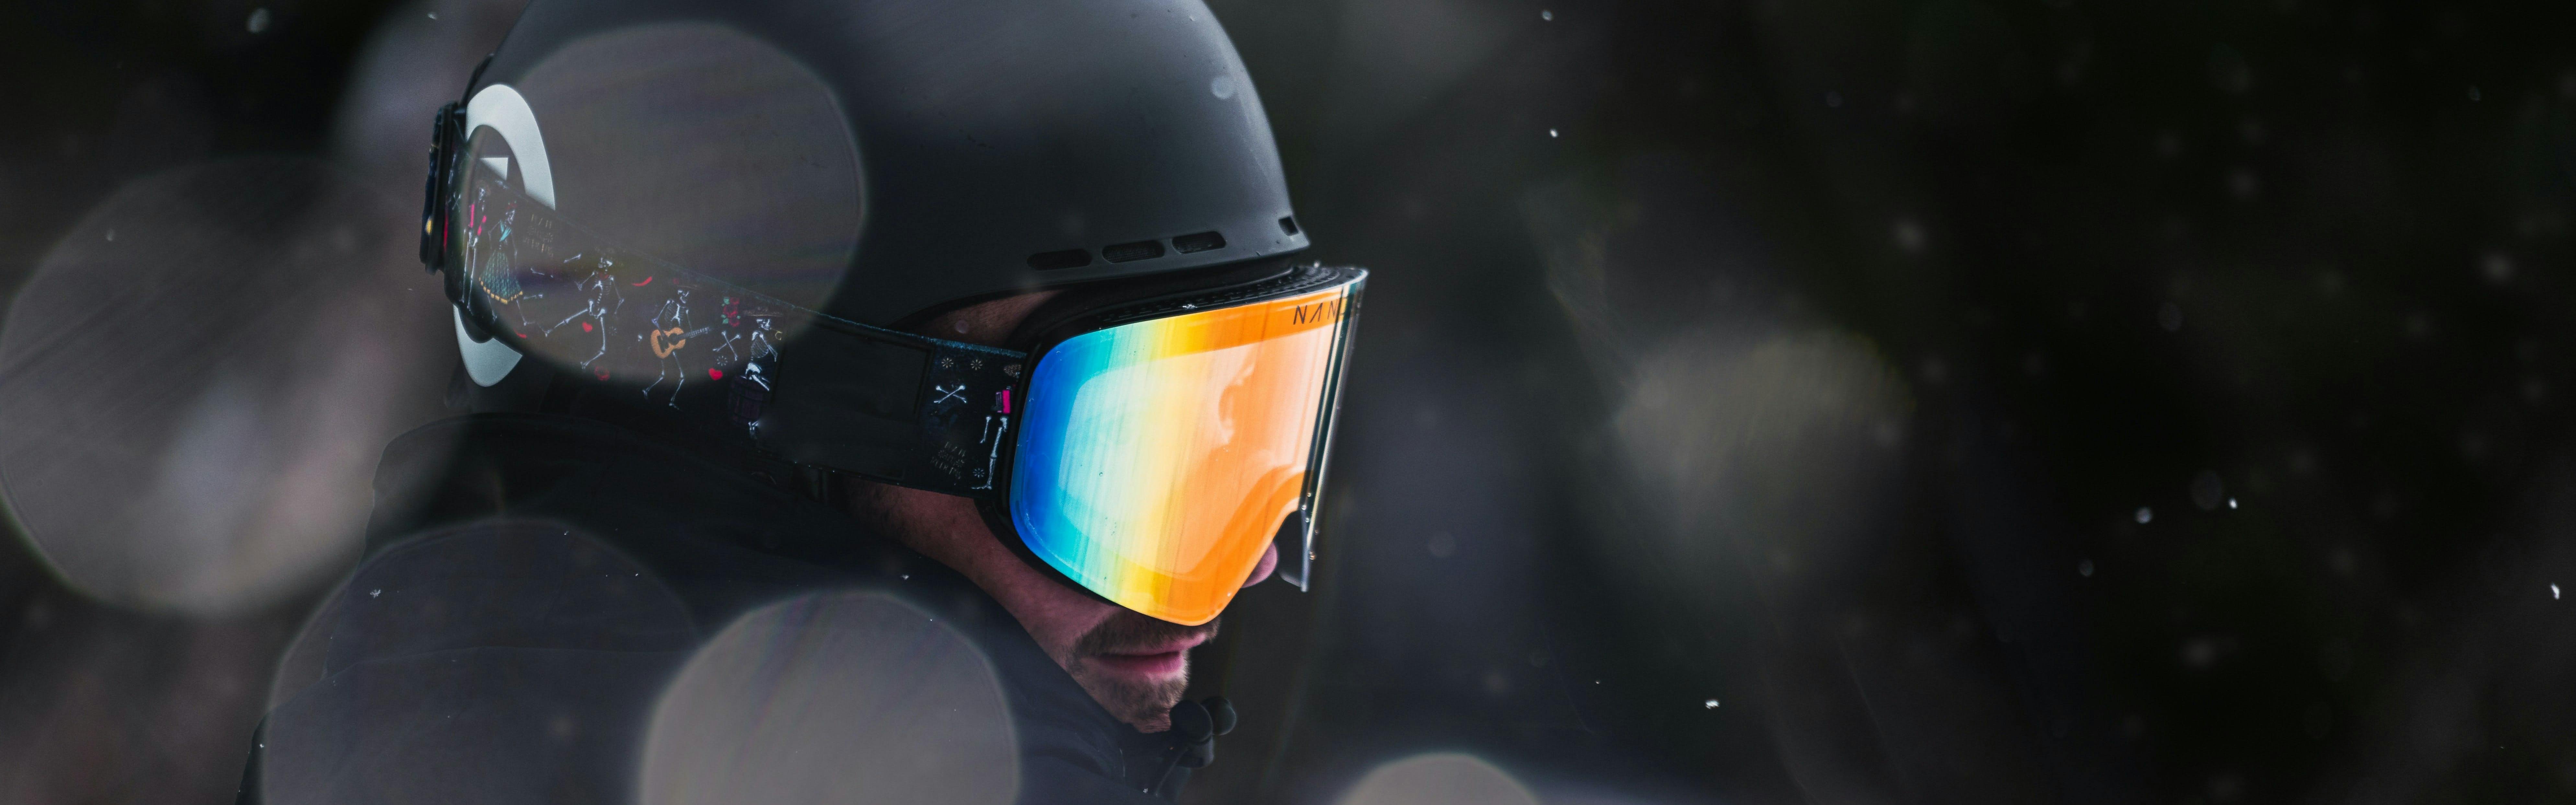 A skier or snowboarder wears a helmet and goggles while snow falls around them.